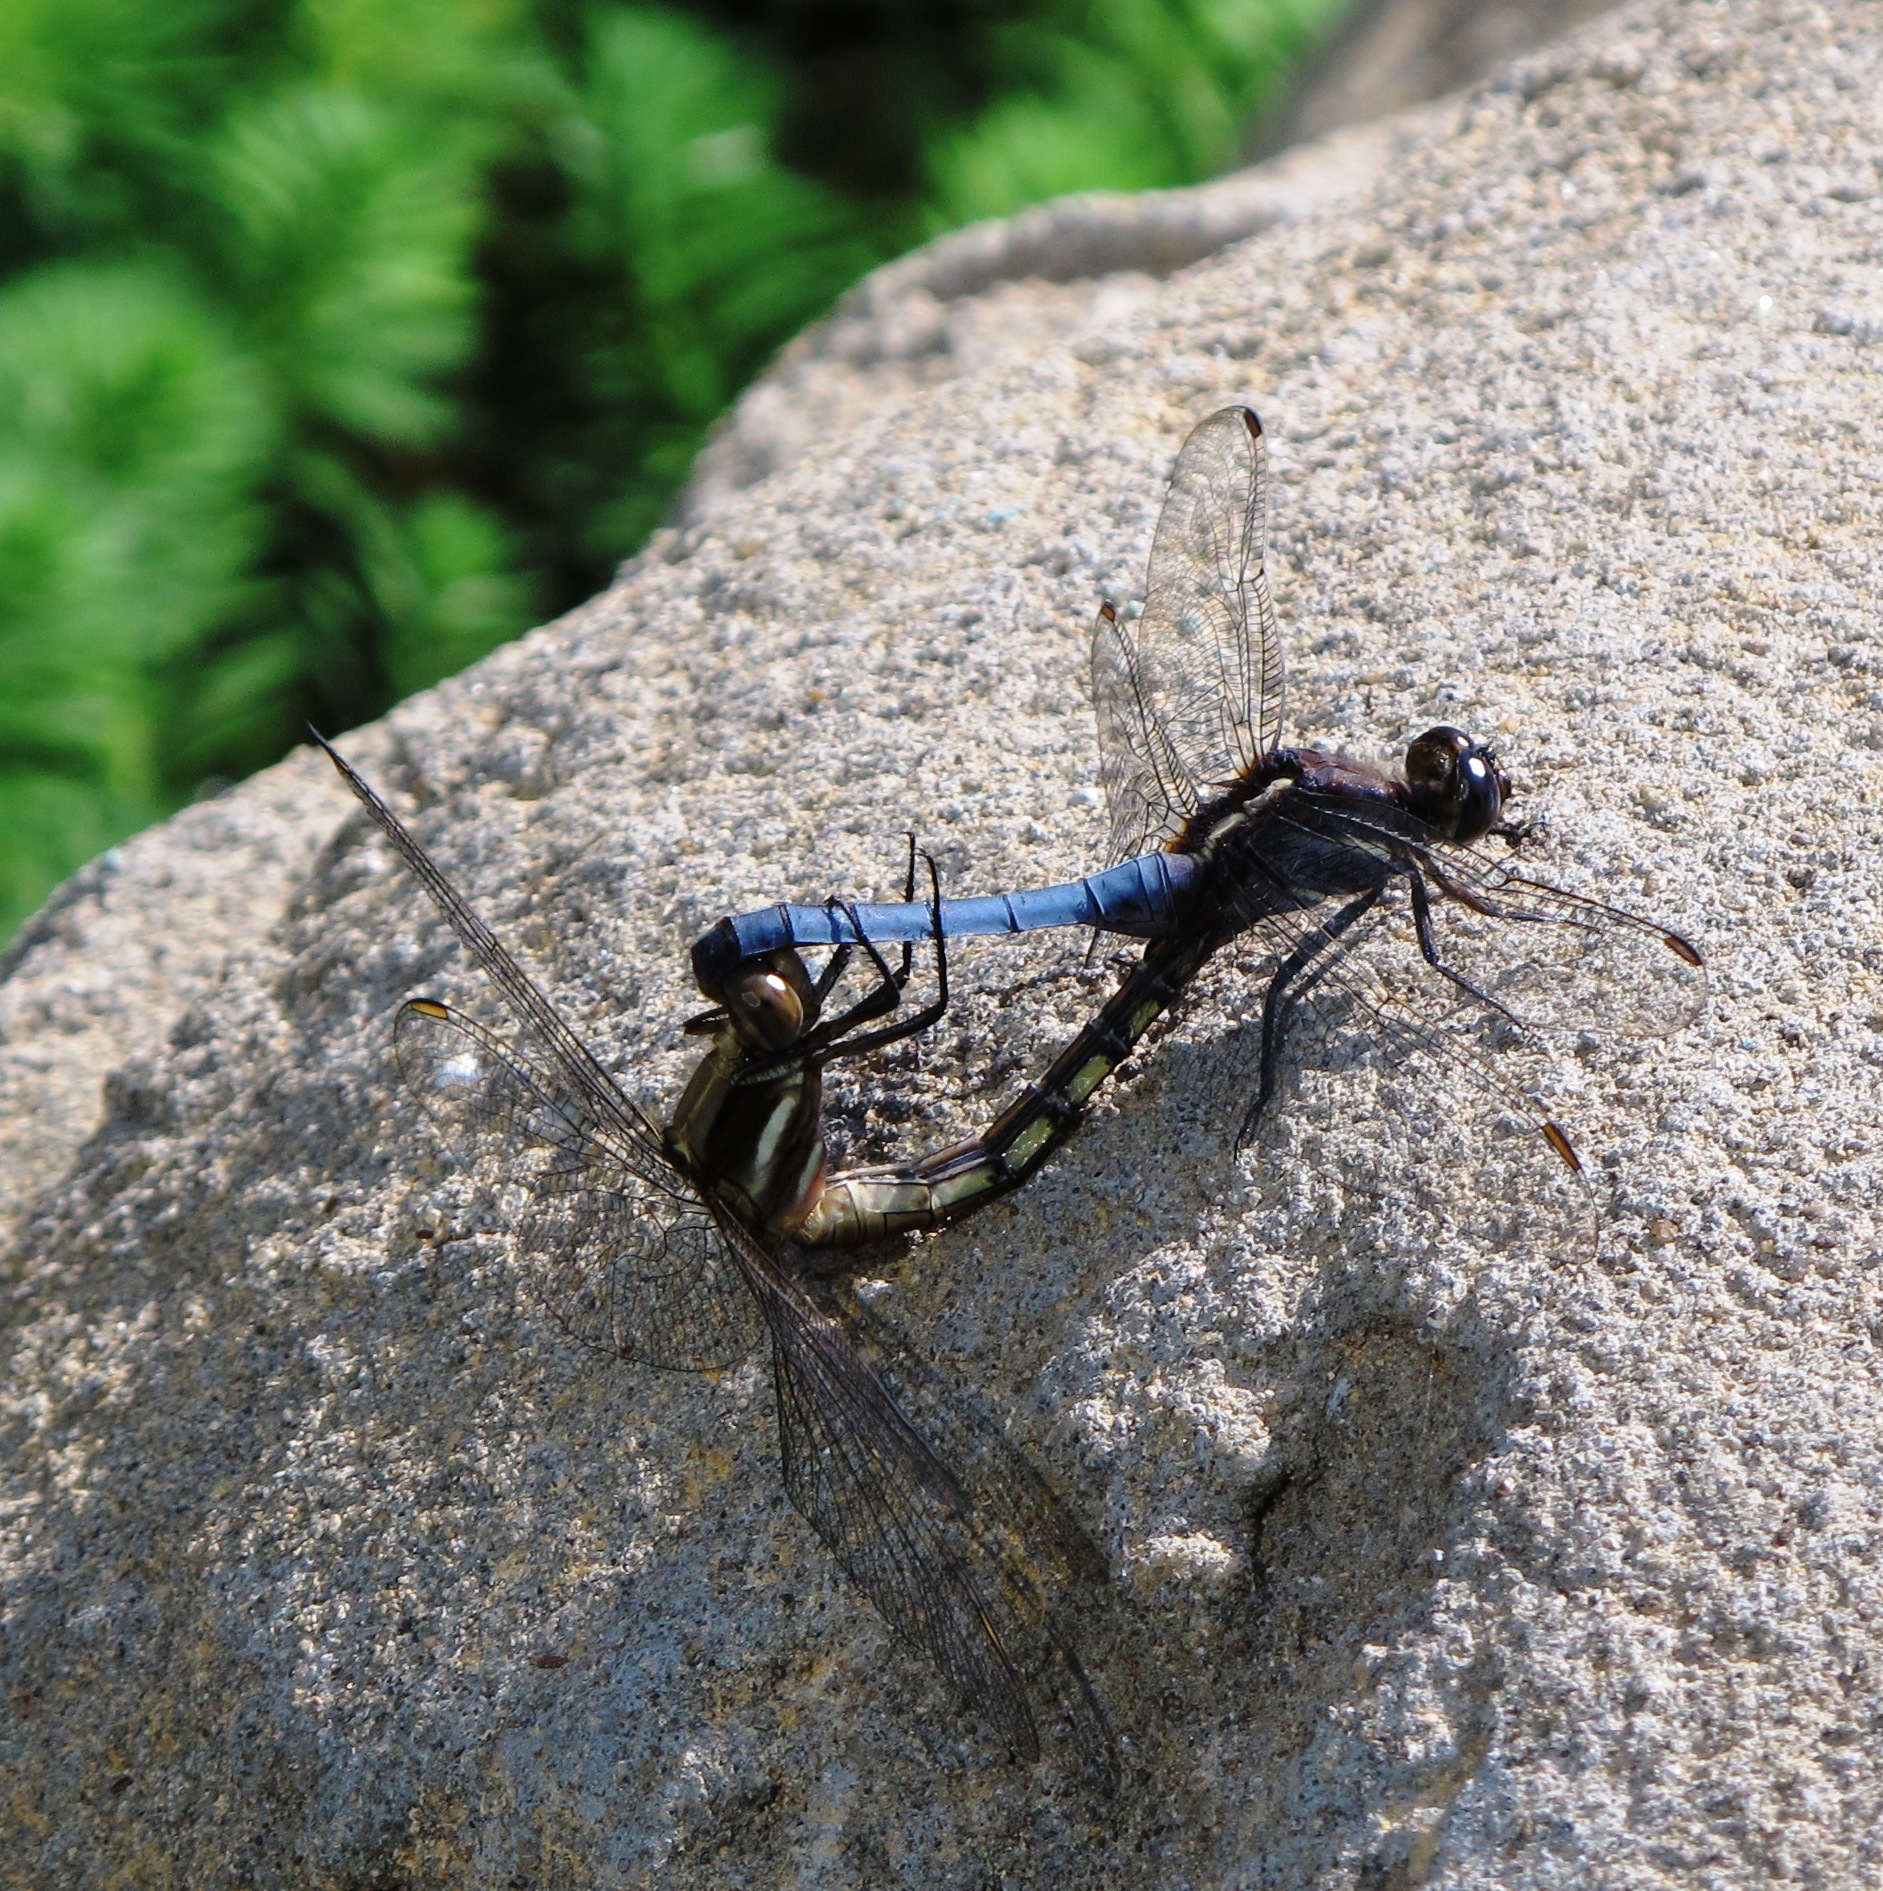 File:Dragonfly - couple.jpg - Wikimedia Commons